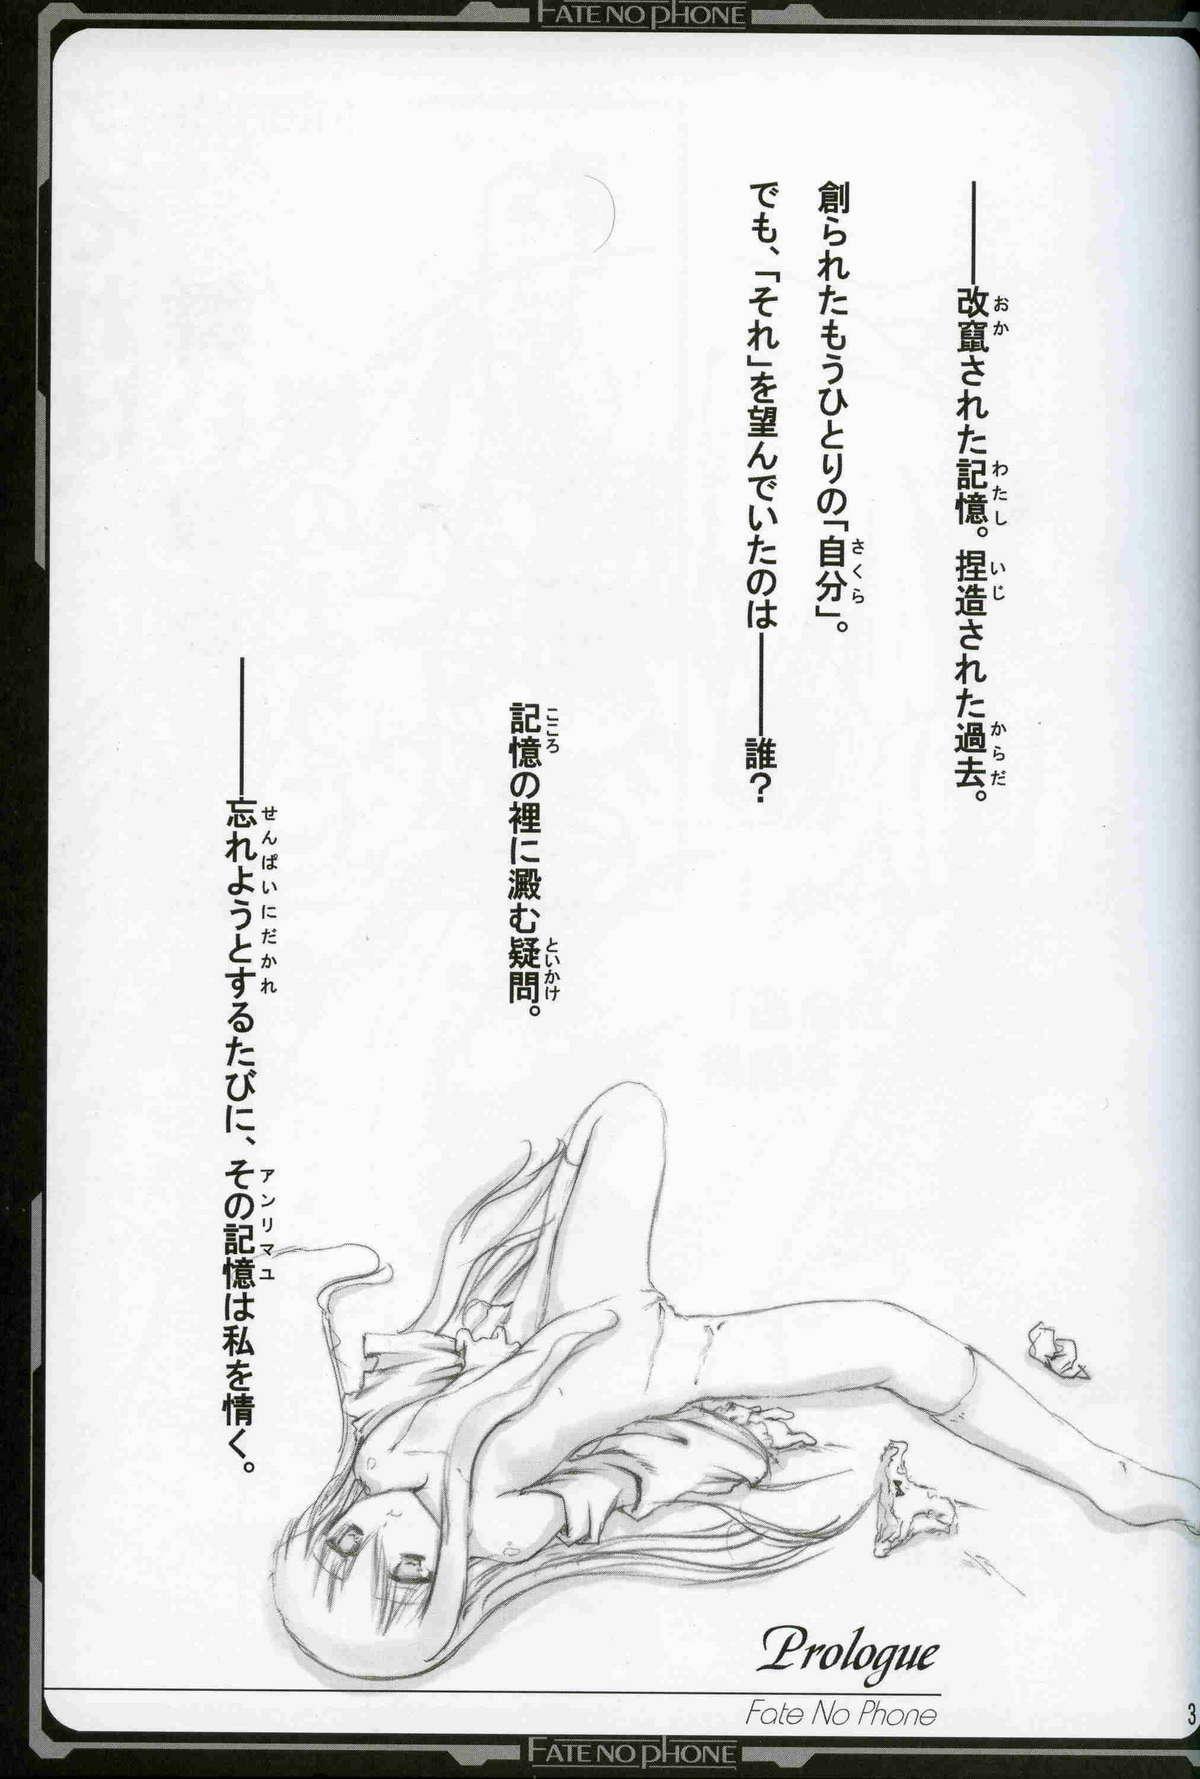 Horny Sluts Fate/no phone - Fate stay night Pussy Licking - Page 2